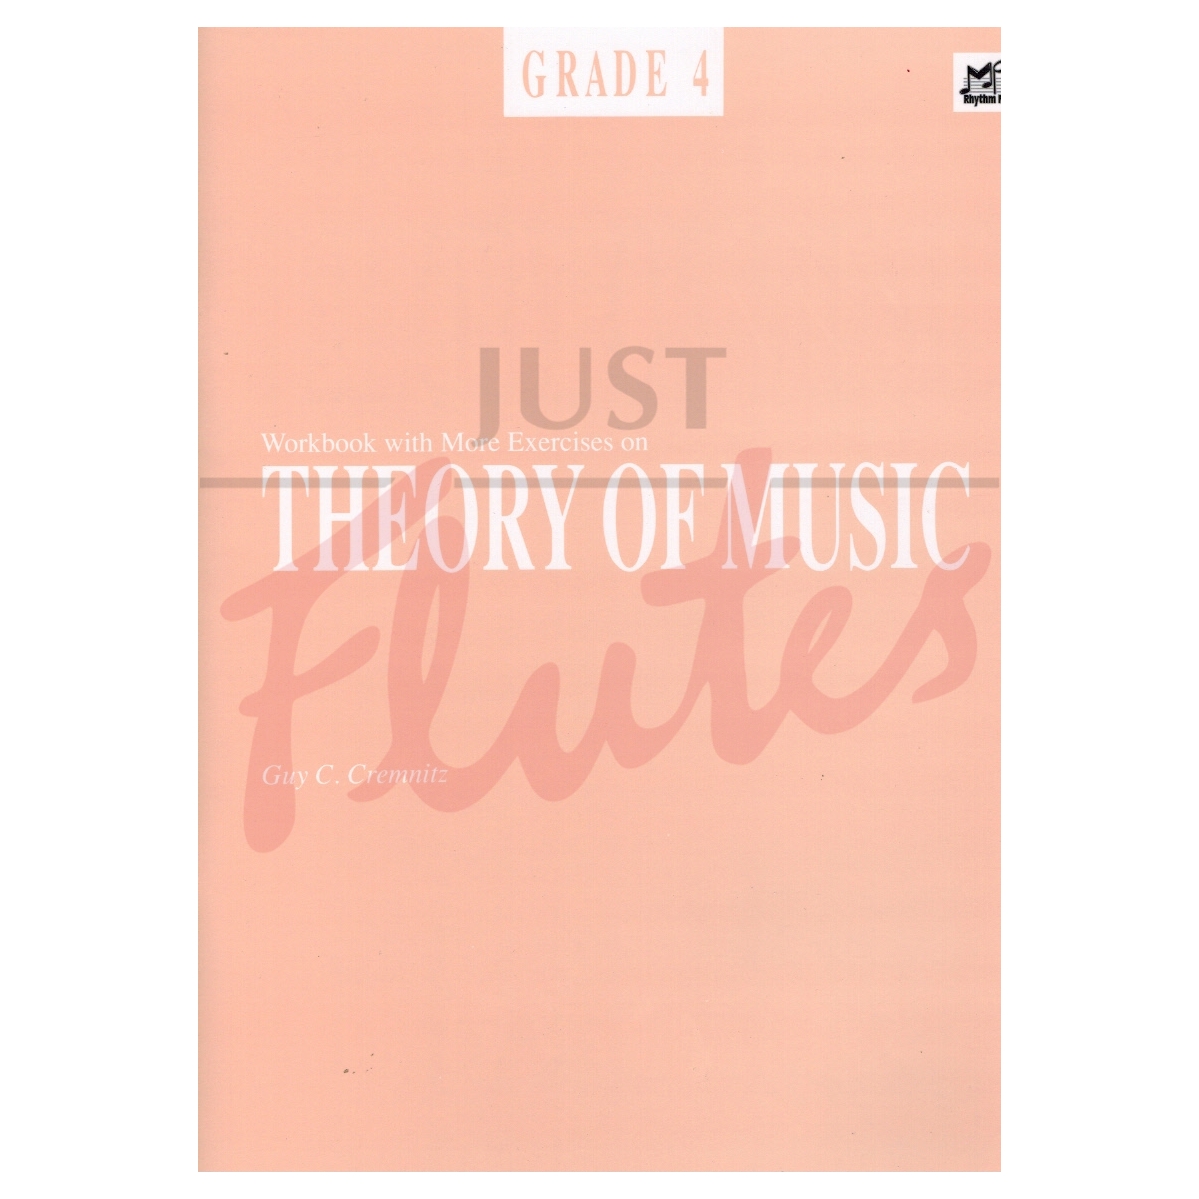 Workbook with More Exercises on Theory of Music Grade 4